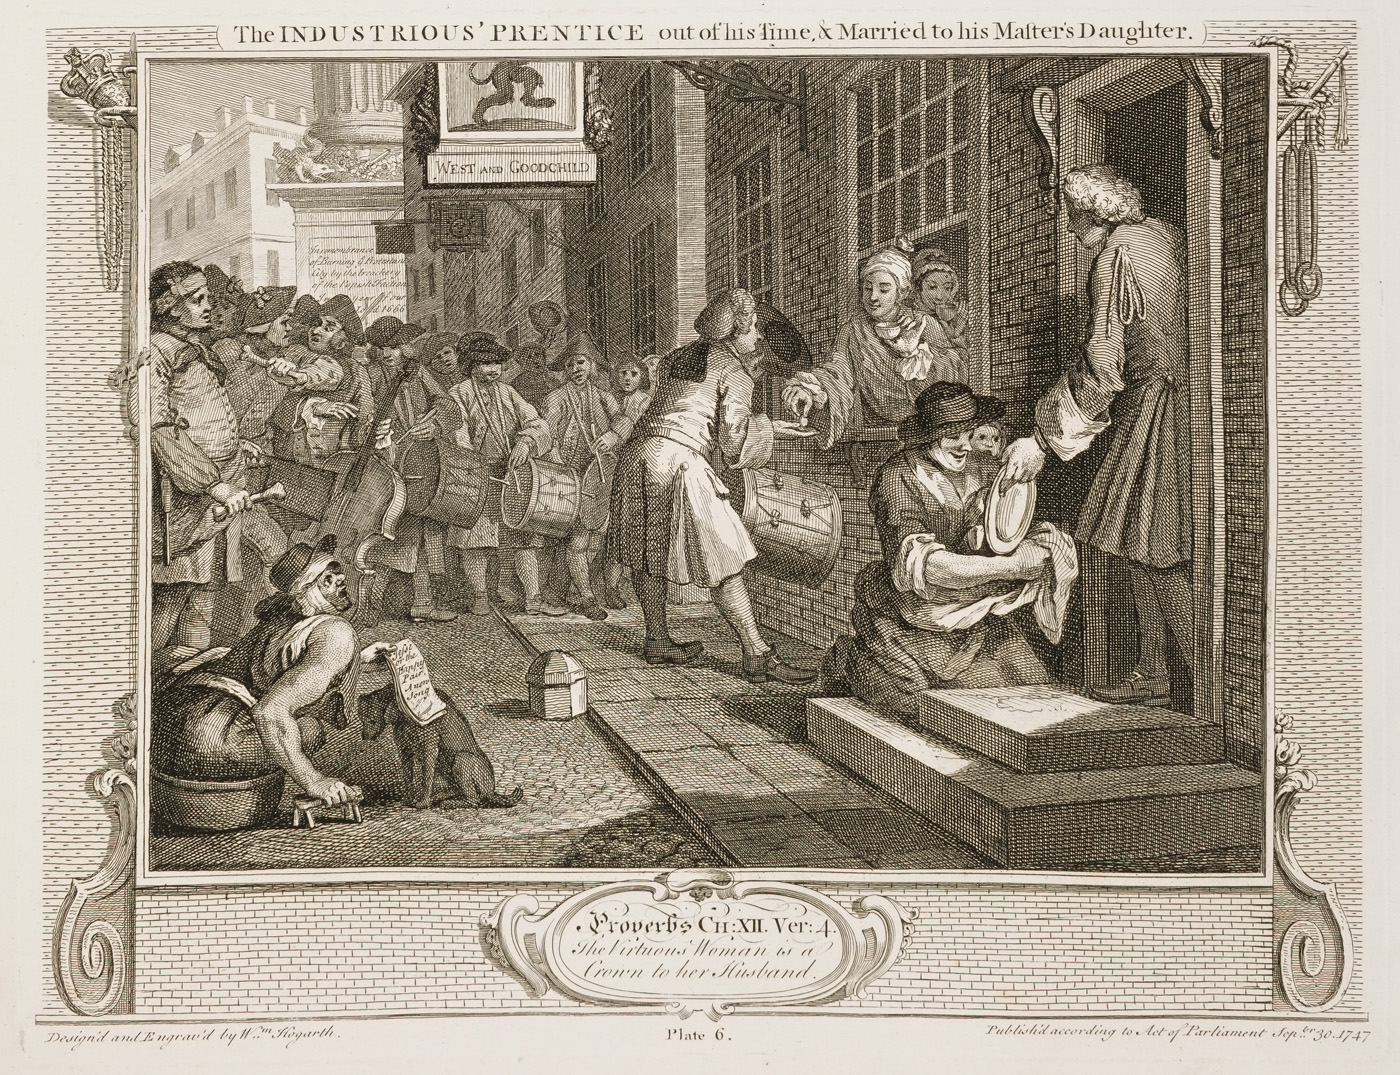 William Hogarth - Industry and Idleness - plate 6